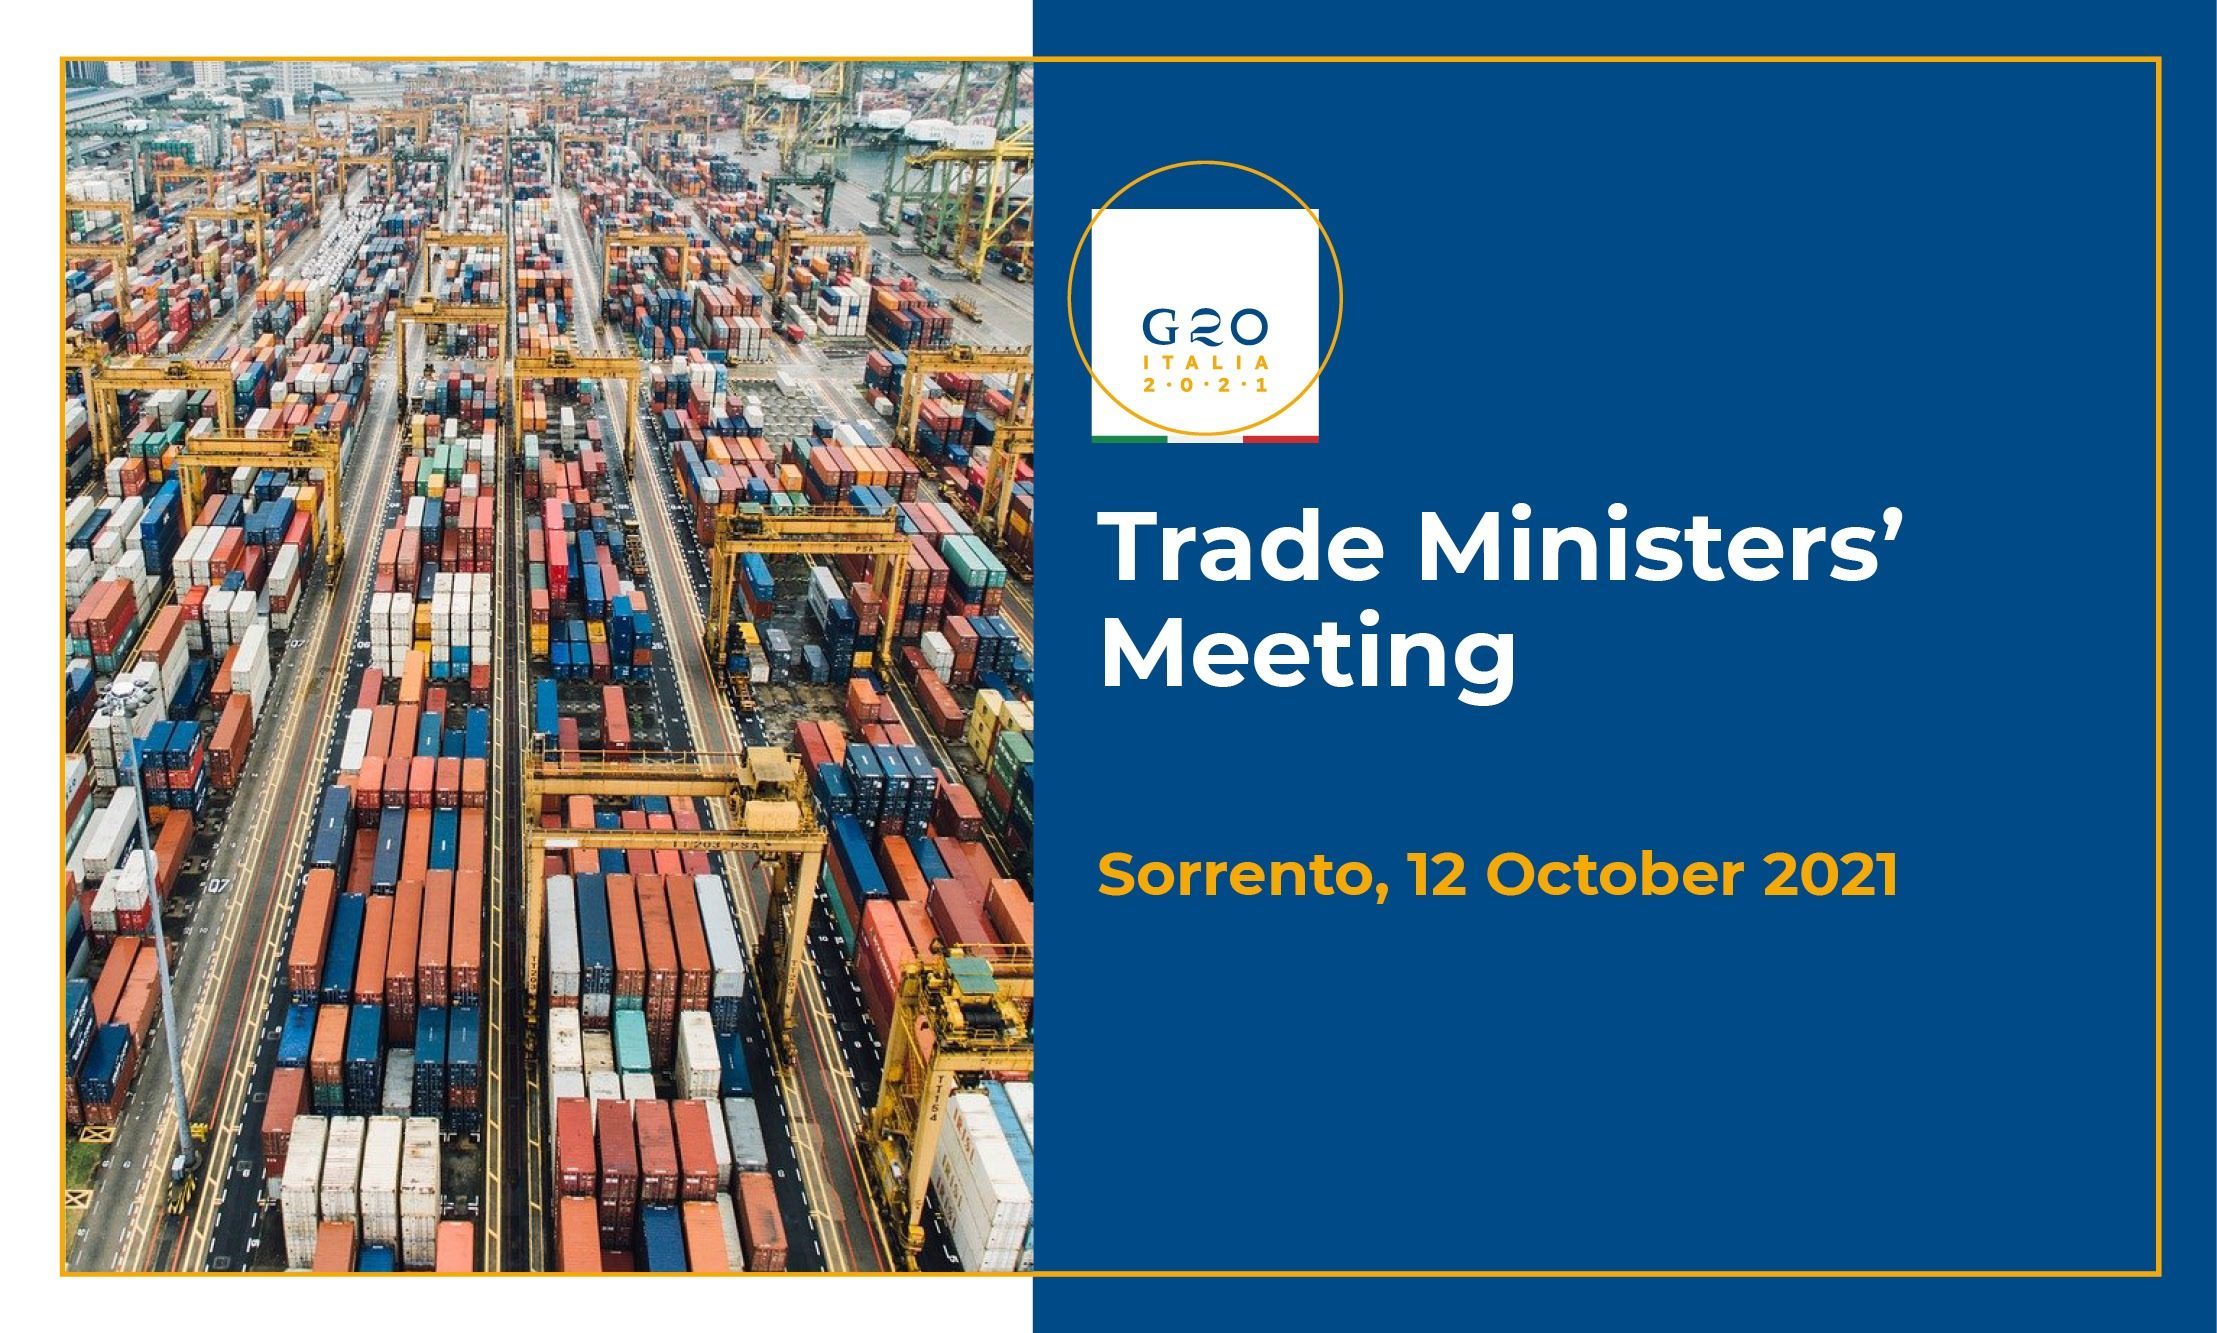 The G20 Ministerial Meeting on Trade to be held in Sorrento